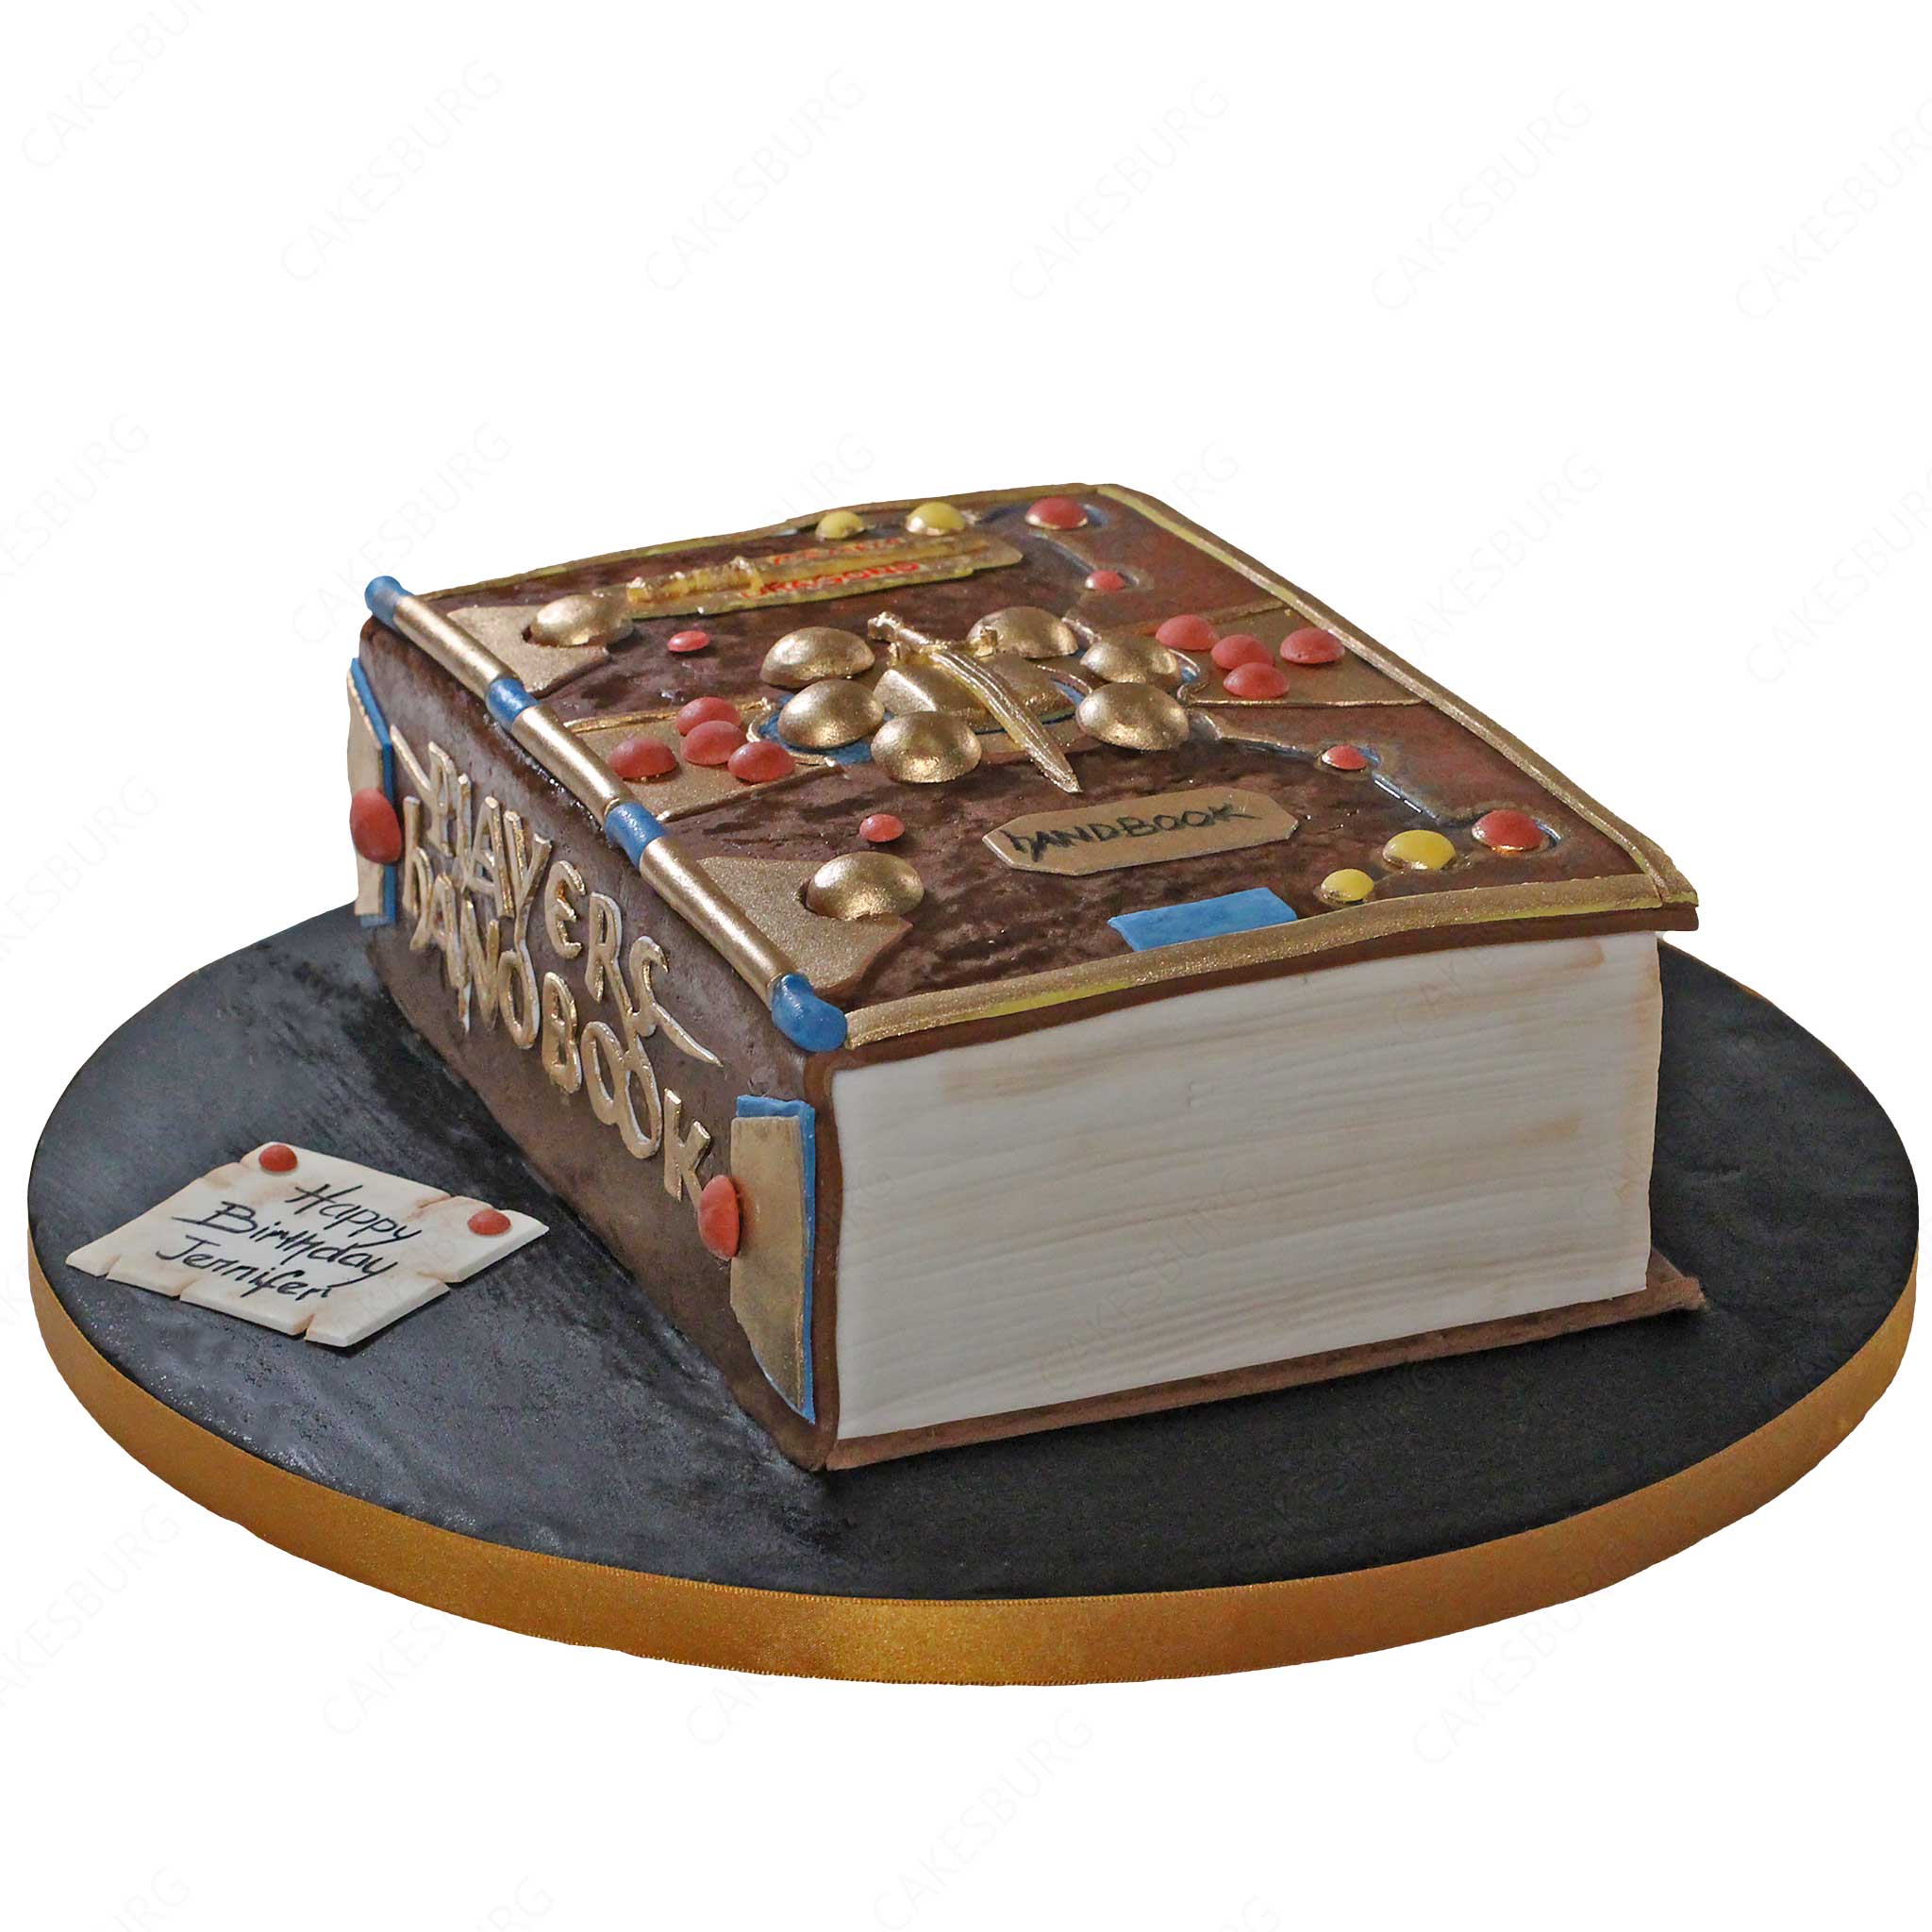 Details more than 71 birthday cake with books best - awesomeenglish.edu.vn